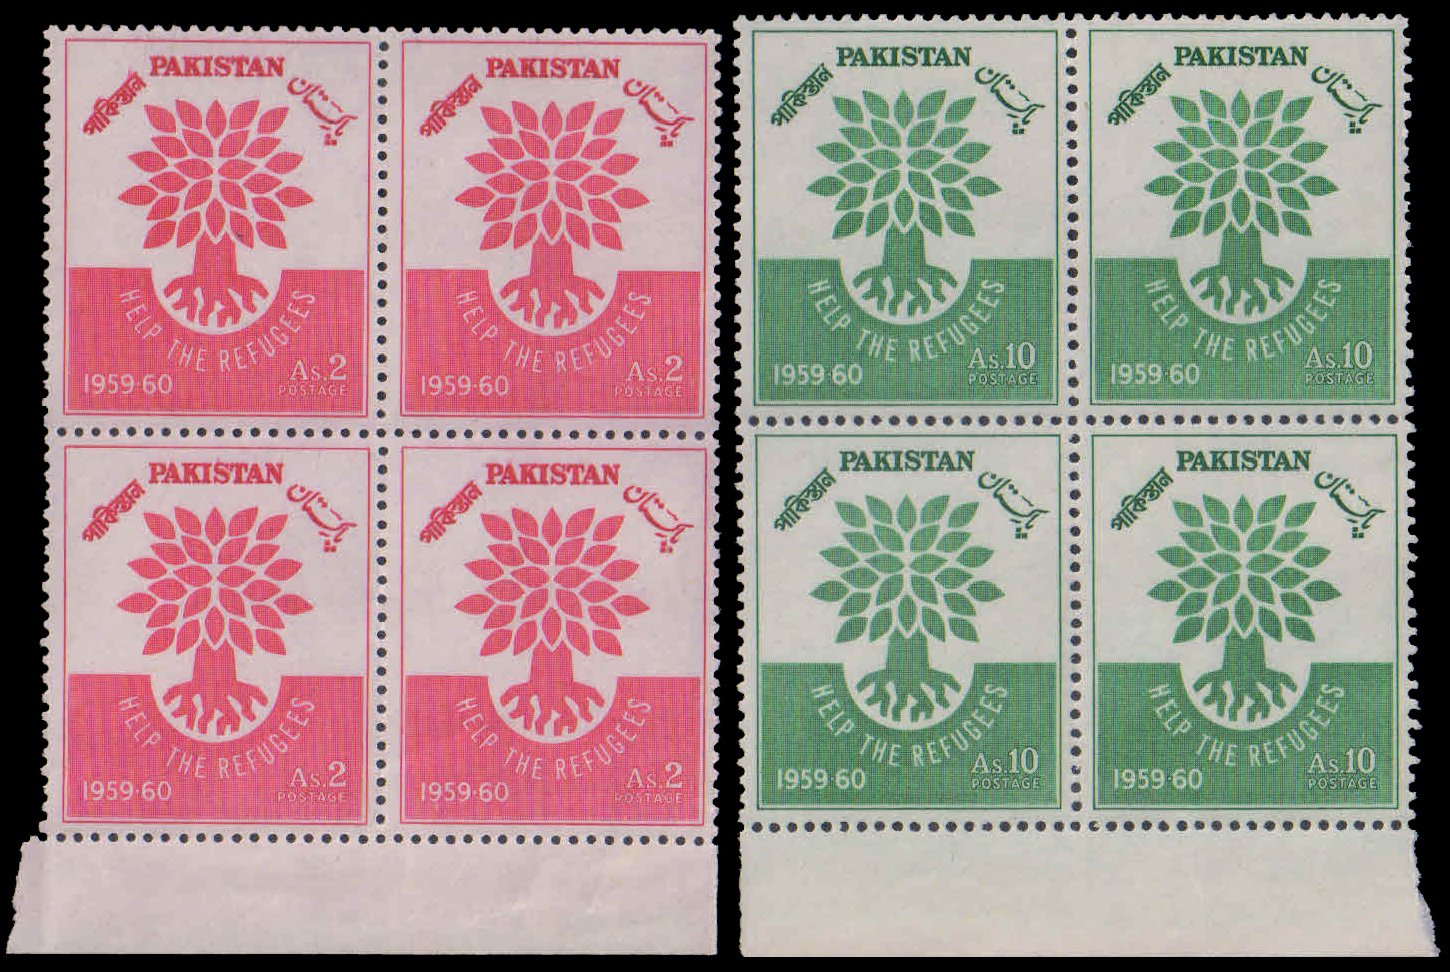 PAKISTAN 1960-World Refugee Year, Uprooted Tree, Set of 2 Stamps Blocks, MNH, White Gum, S.G. 112-113